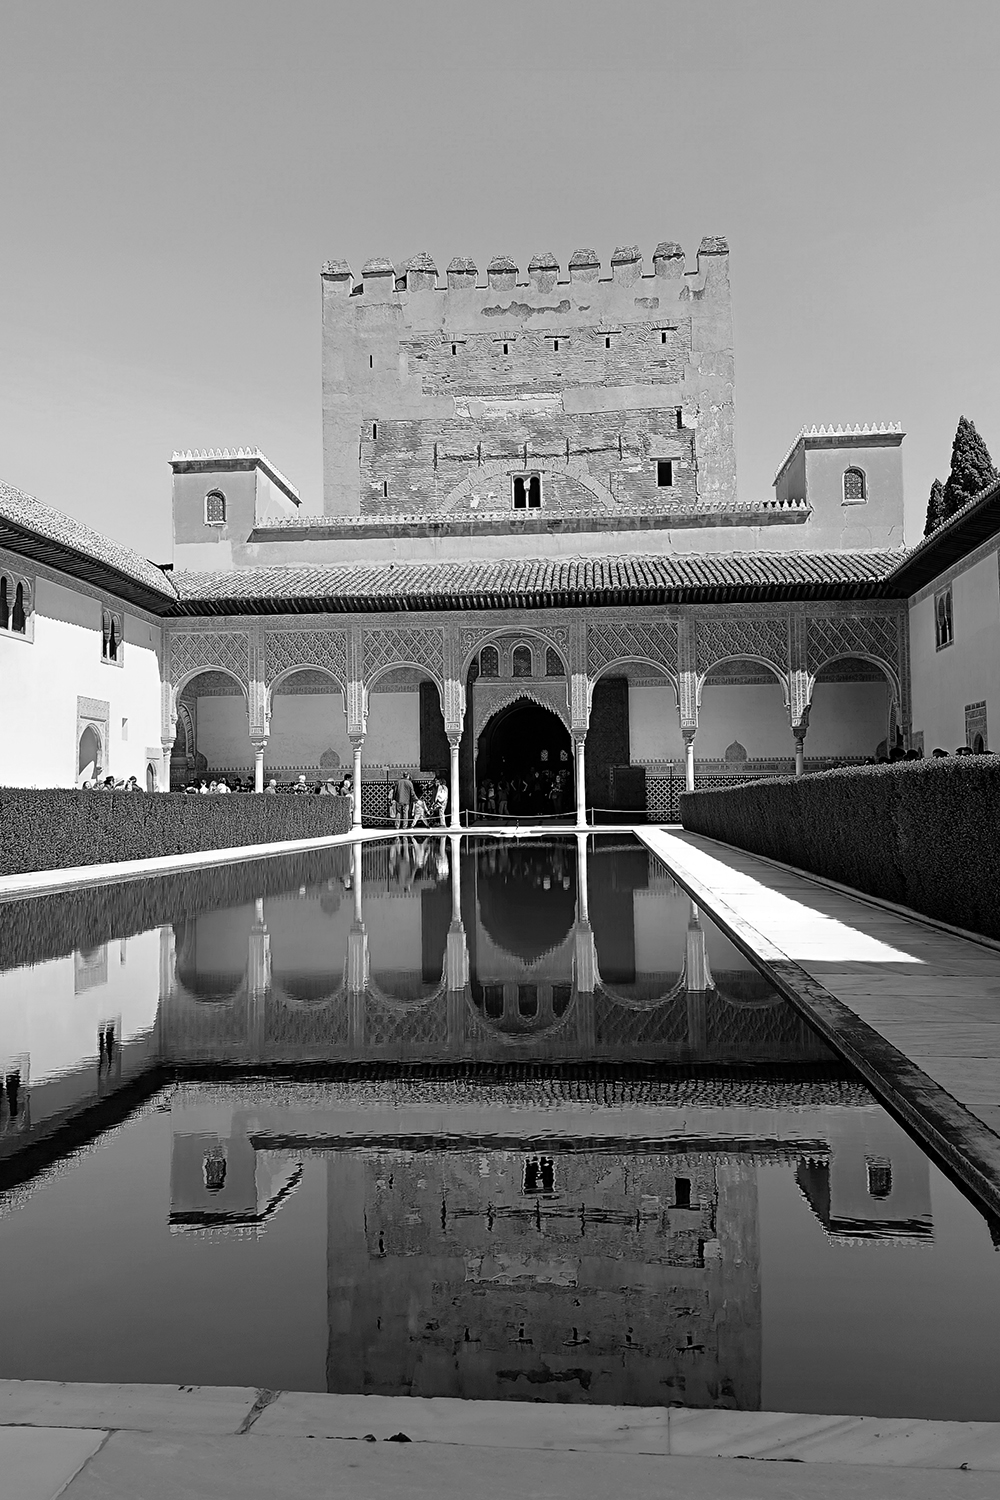 OUR FAMILY TRIP TO ANDALUSIA. PART II: THE ALHAMBRA OF GRANADA AND THE FESTIVAL OF THE CROSSES